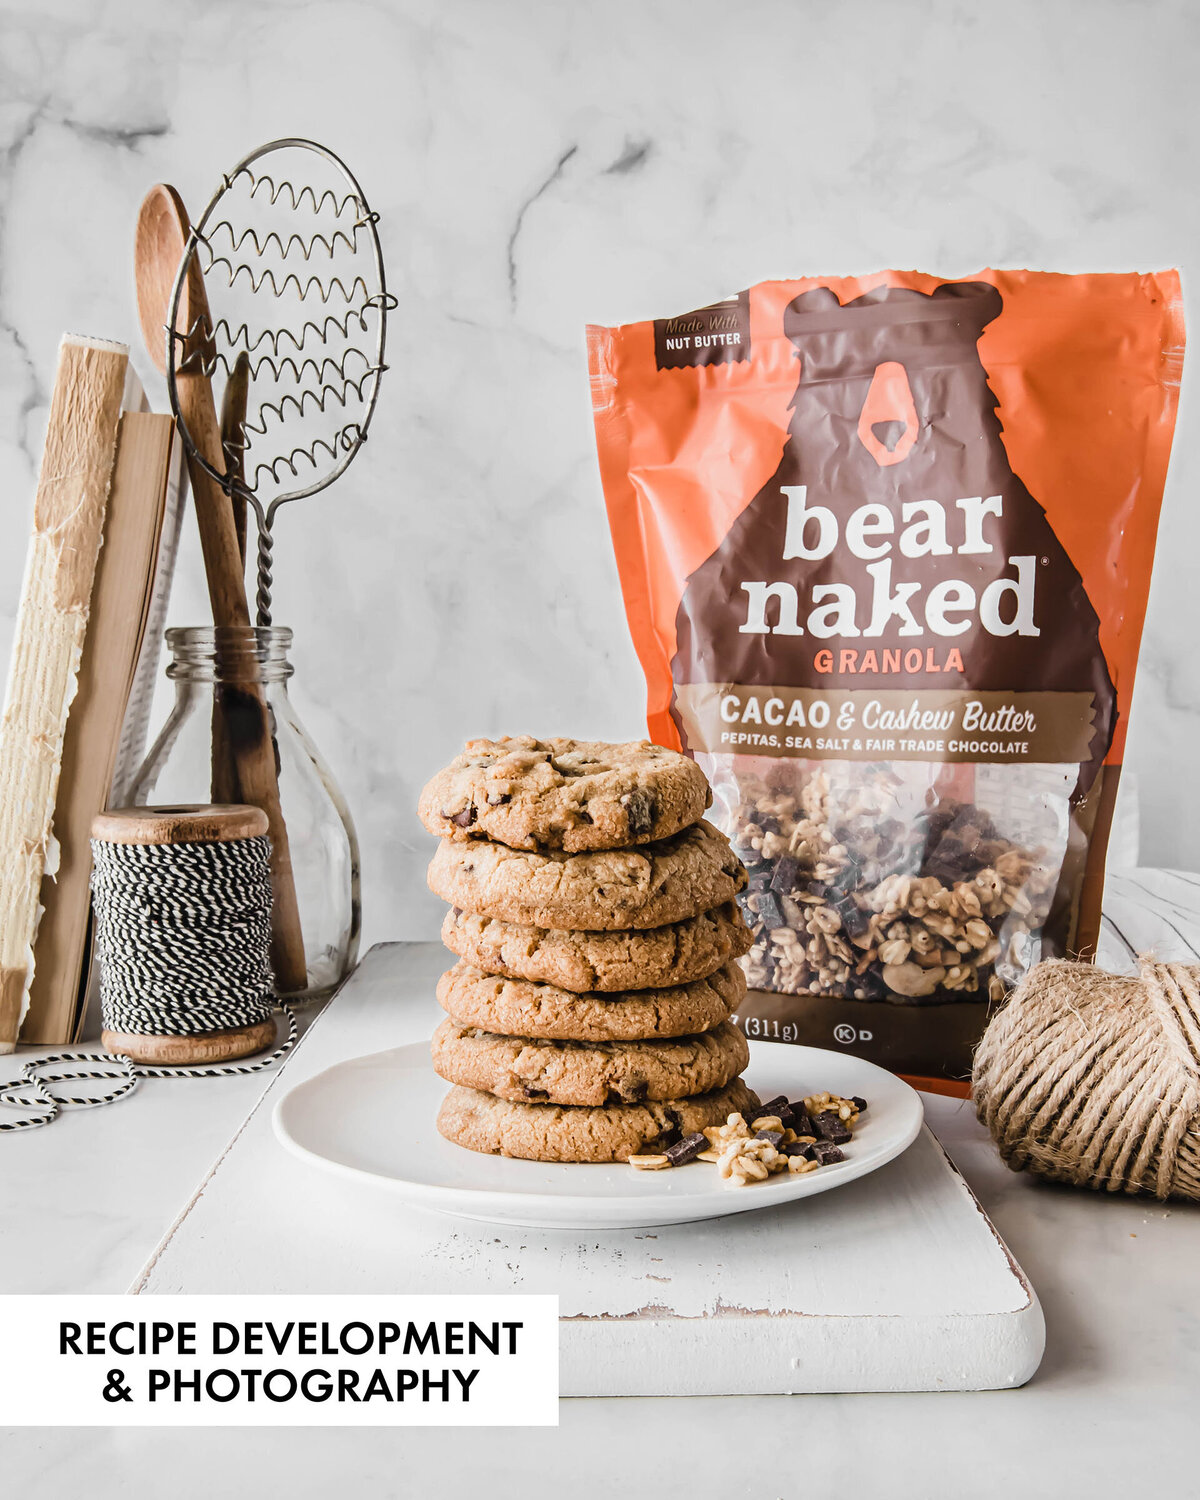 Recipe development and food photography for major national brands by Nancy Ingersoll